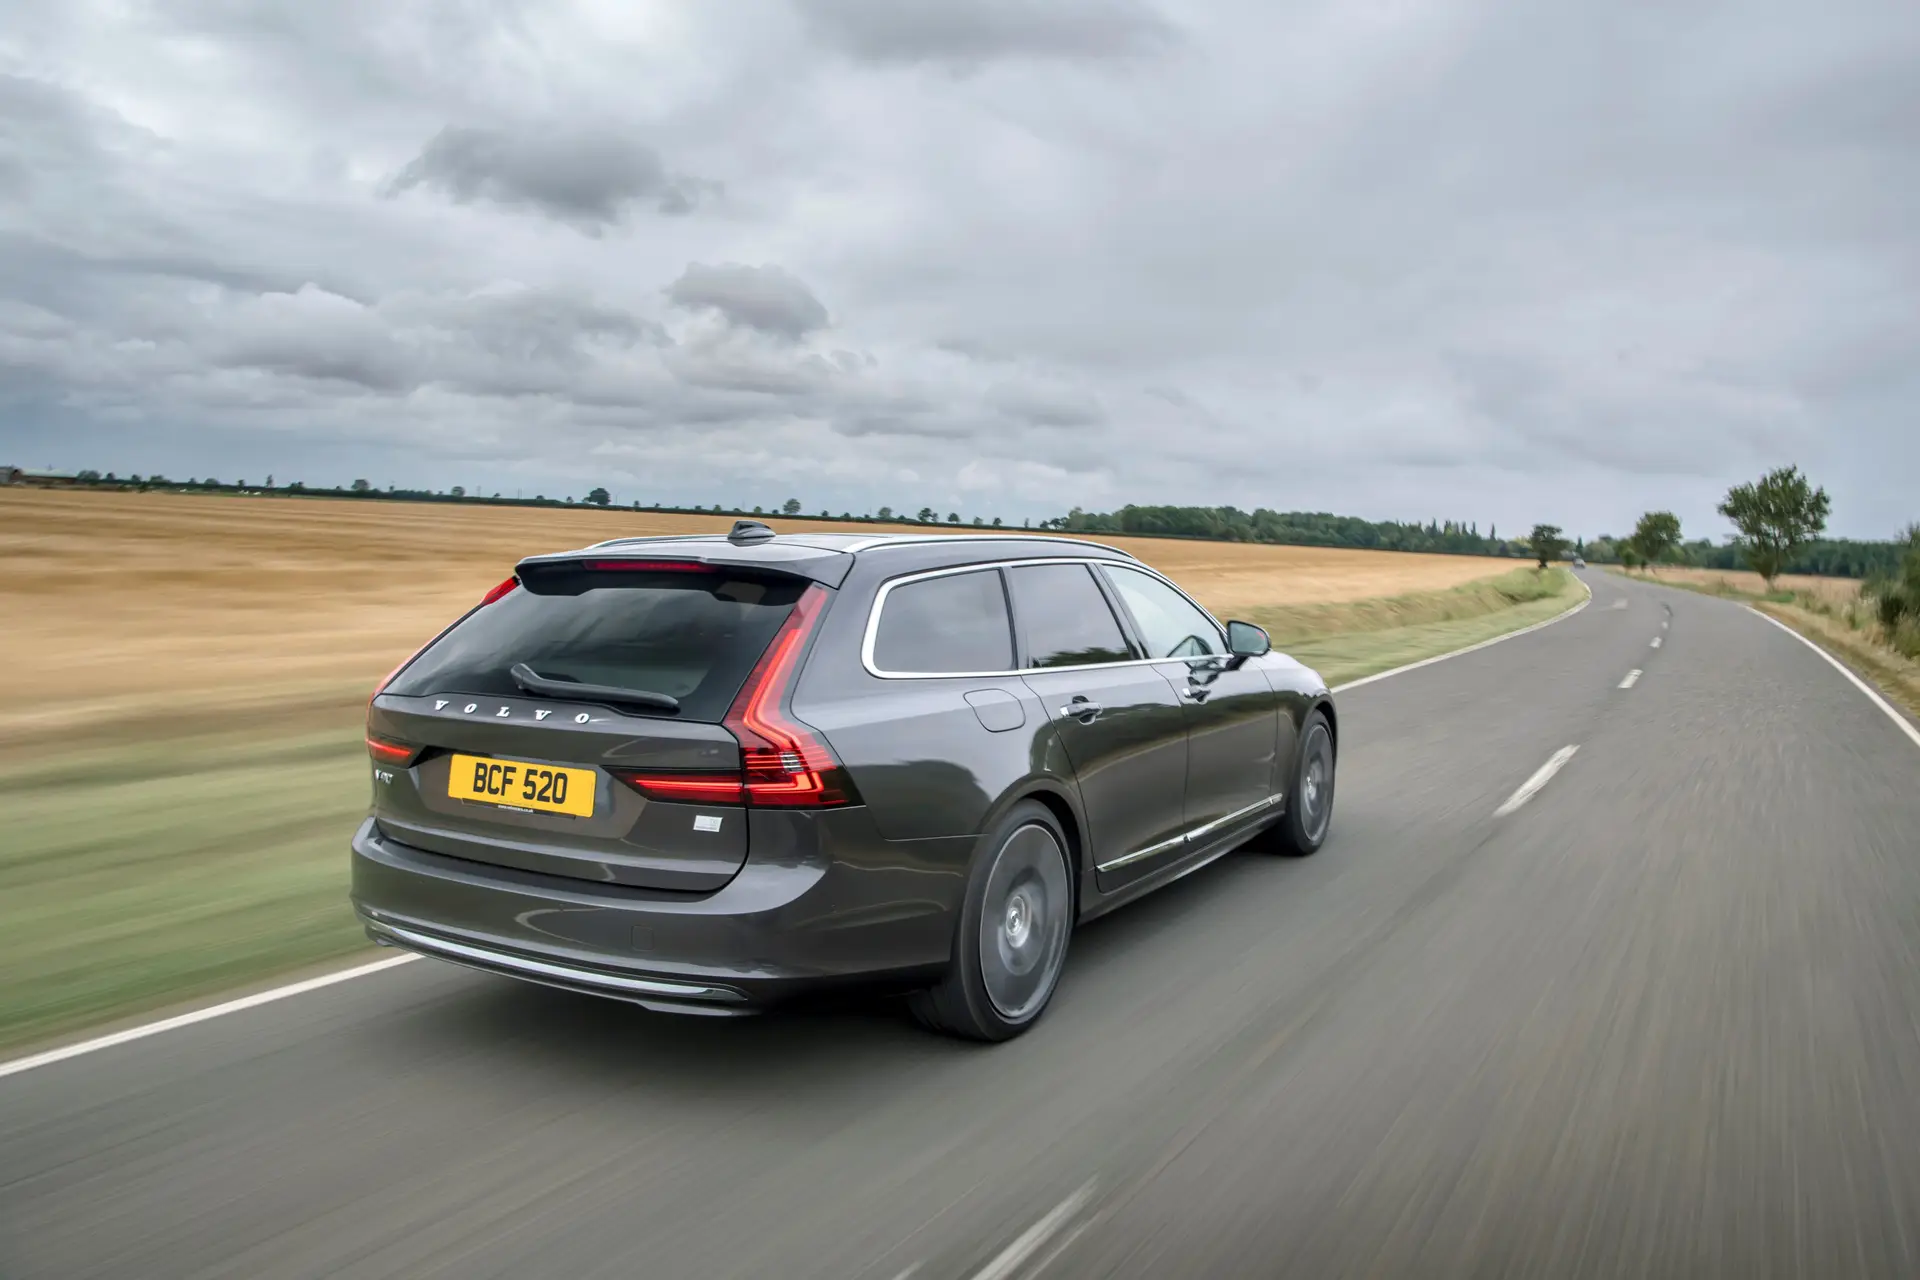 Volvo V90 Review 2023: exterior rear three quarter photo of the Volvo V90 on the road